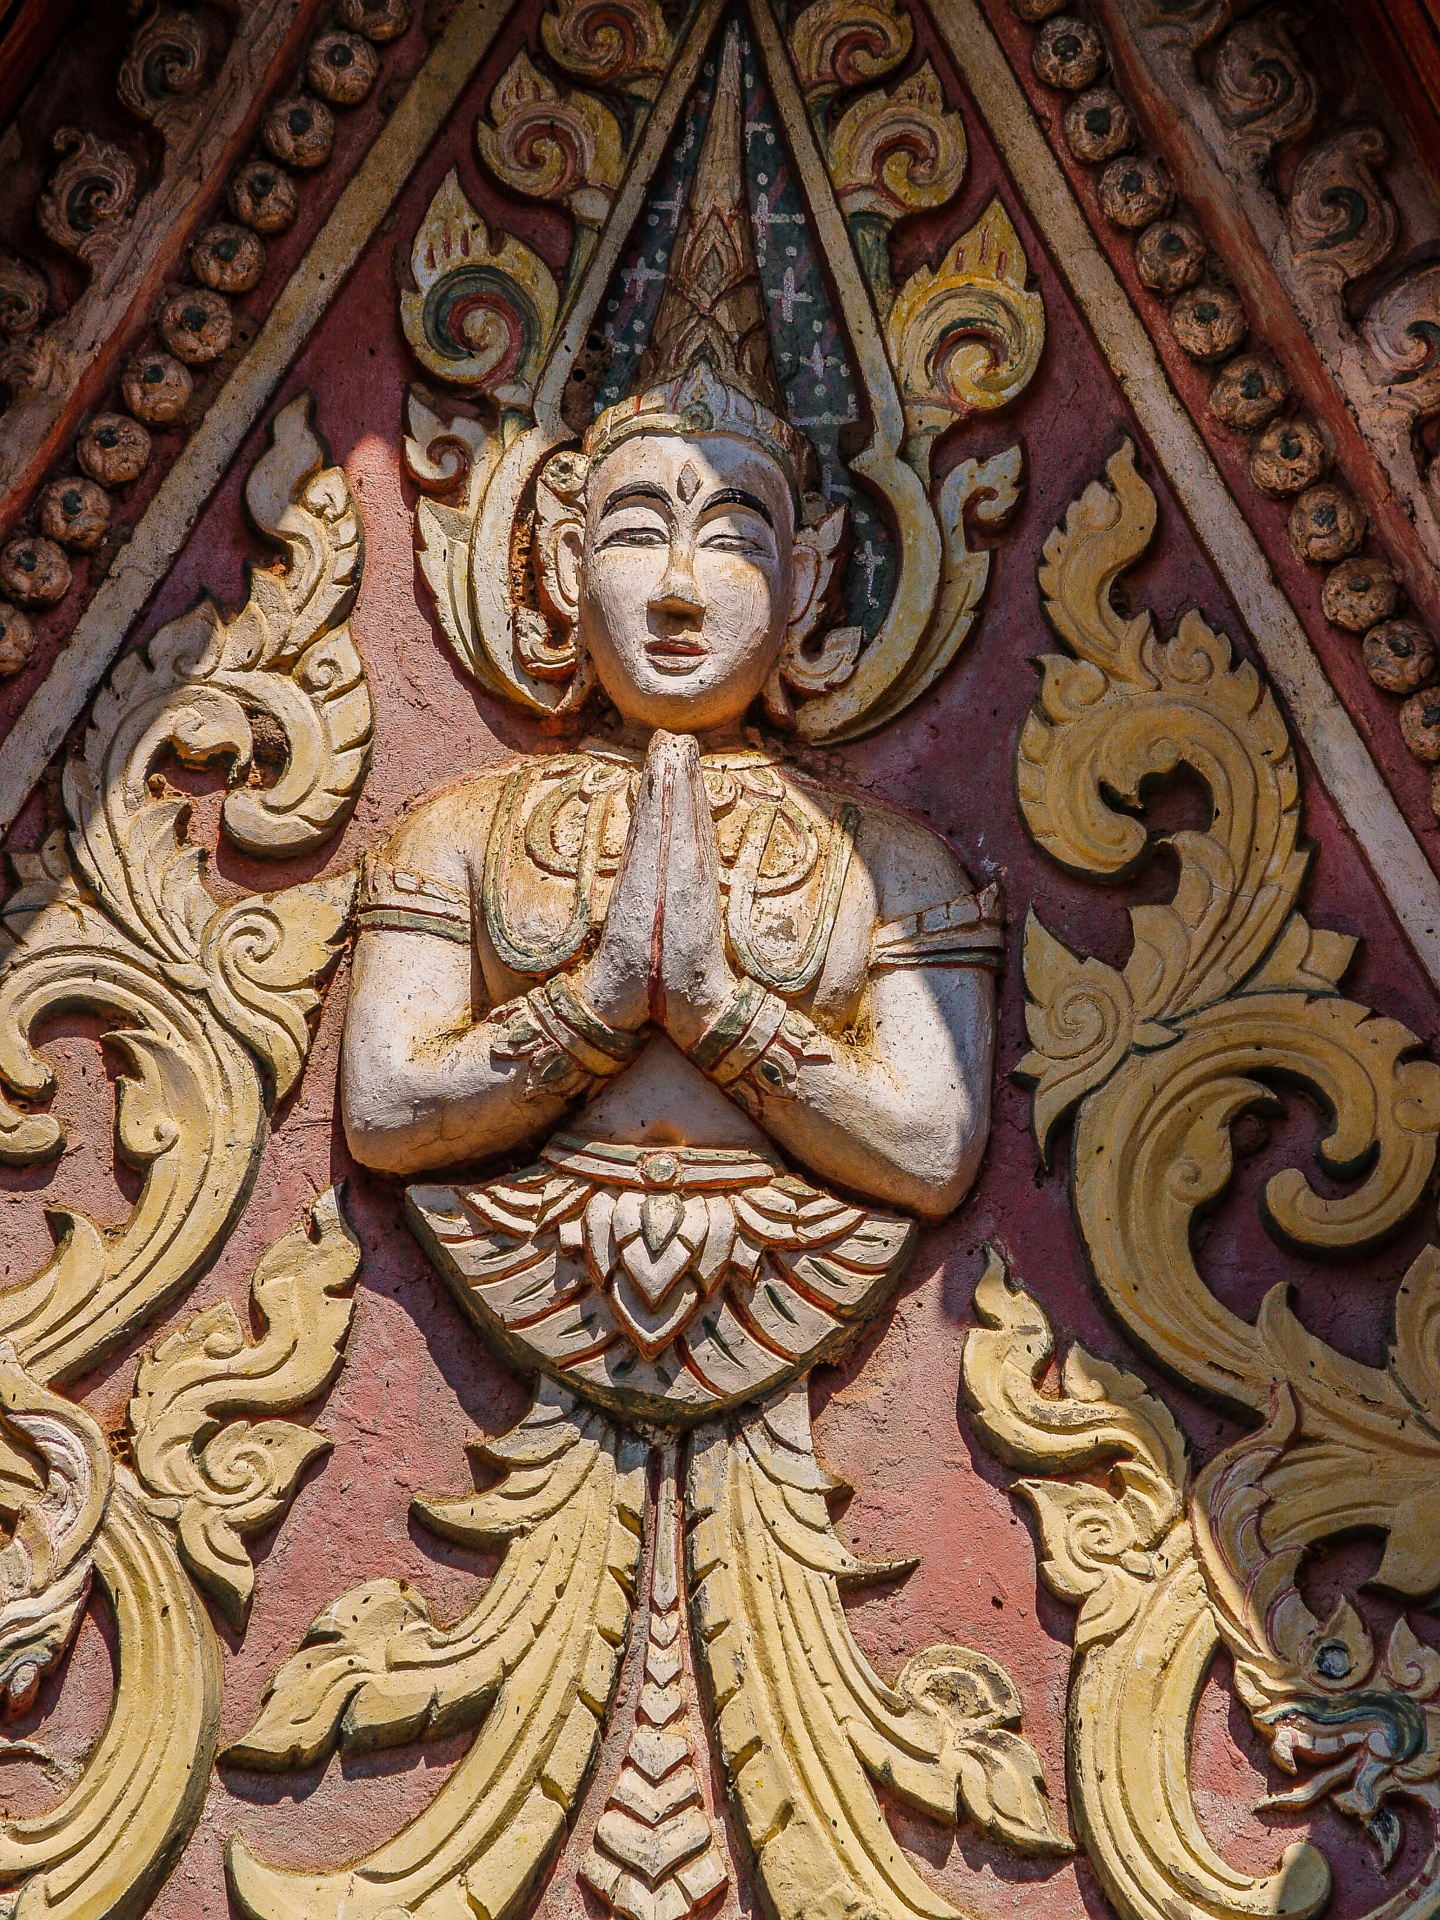 Wat Mahathat Temple, Phra That Anon